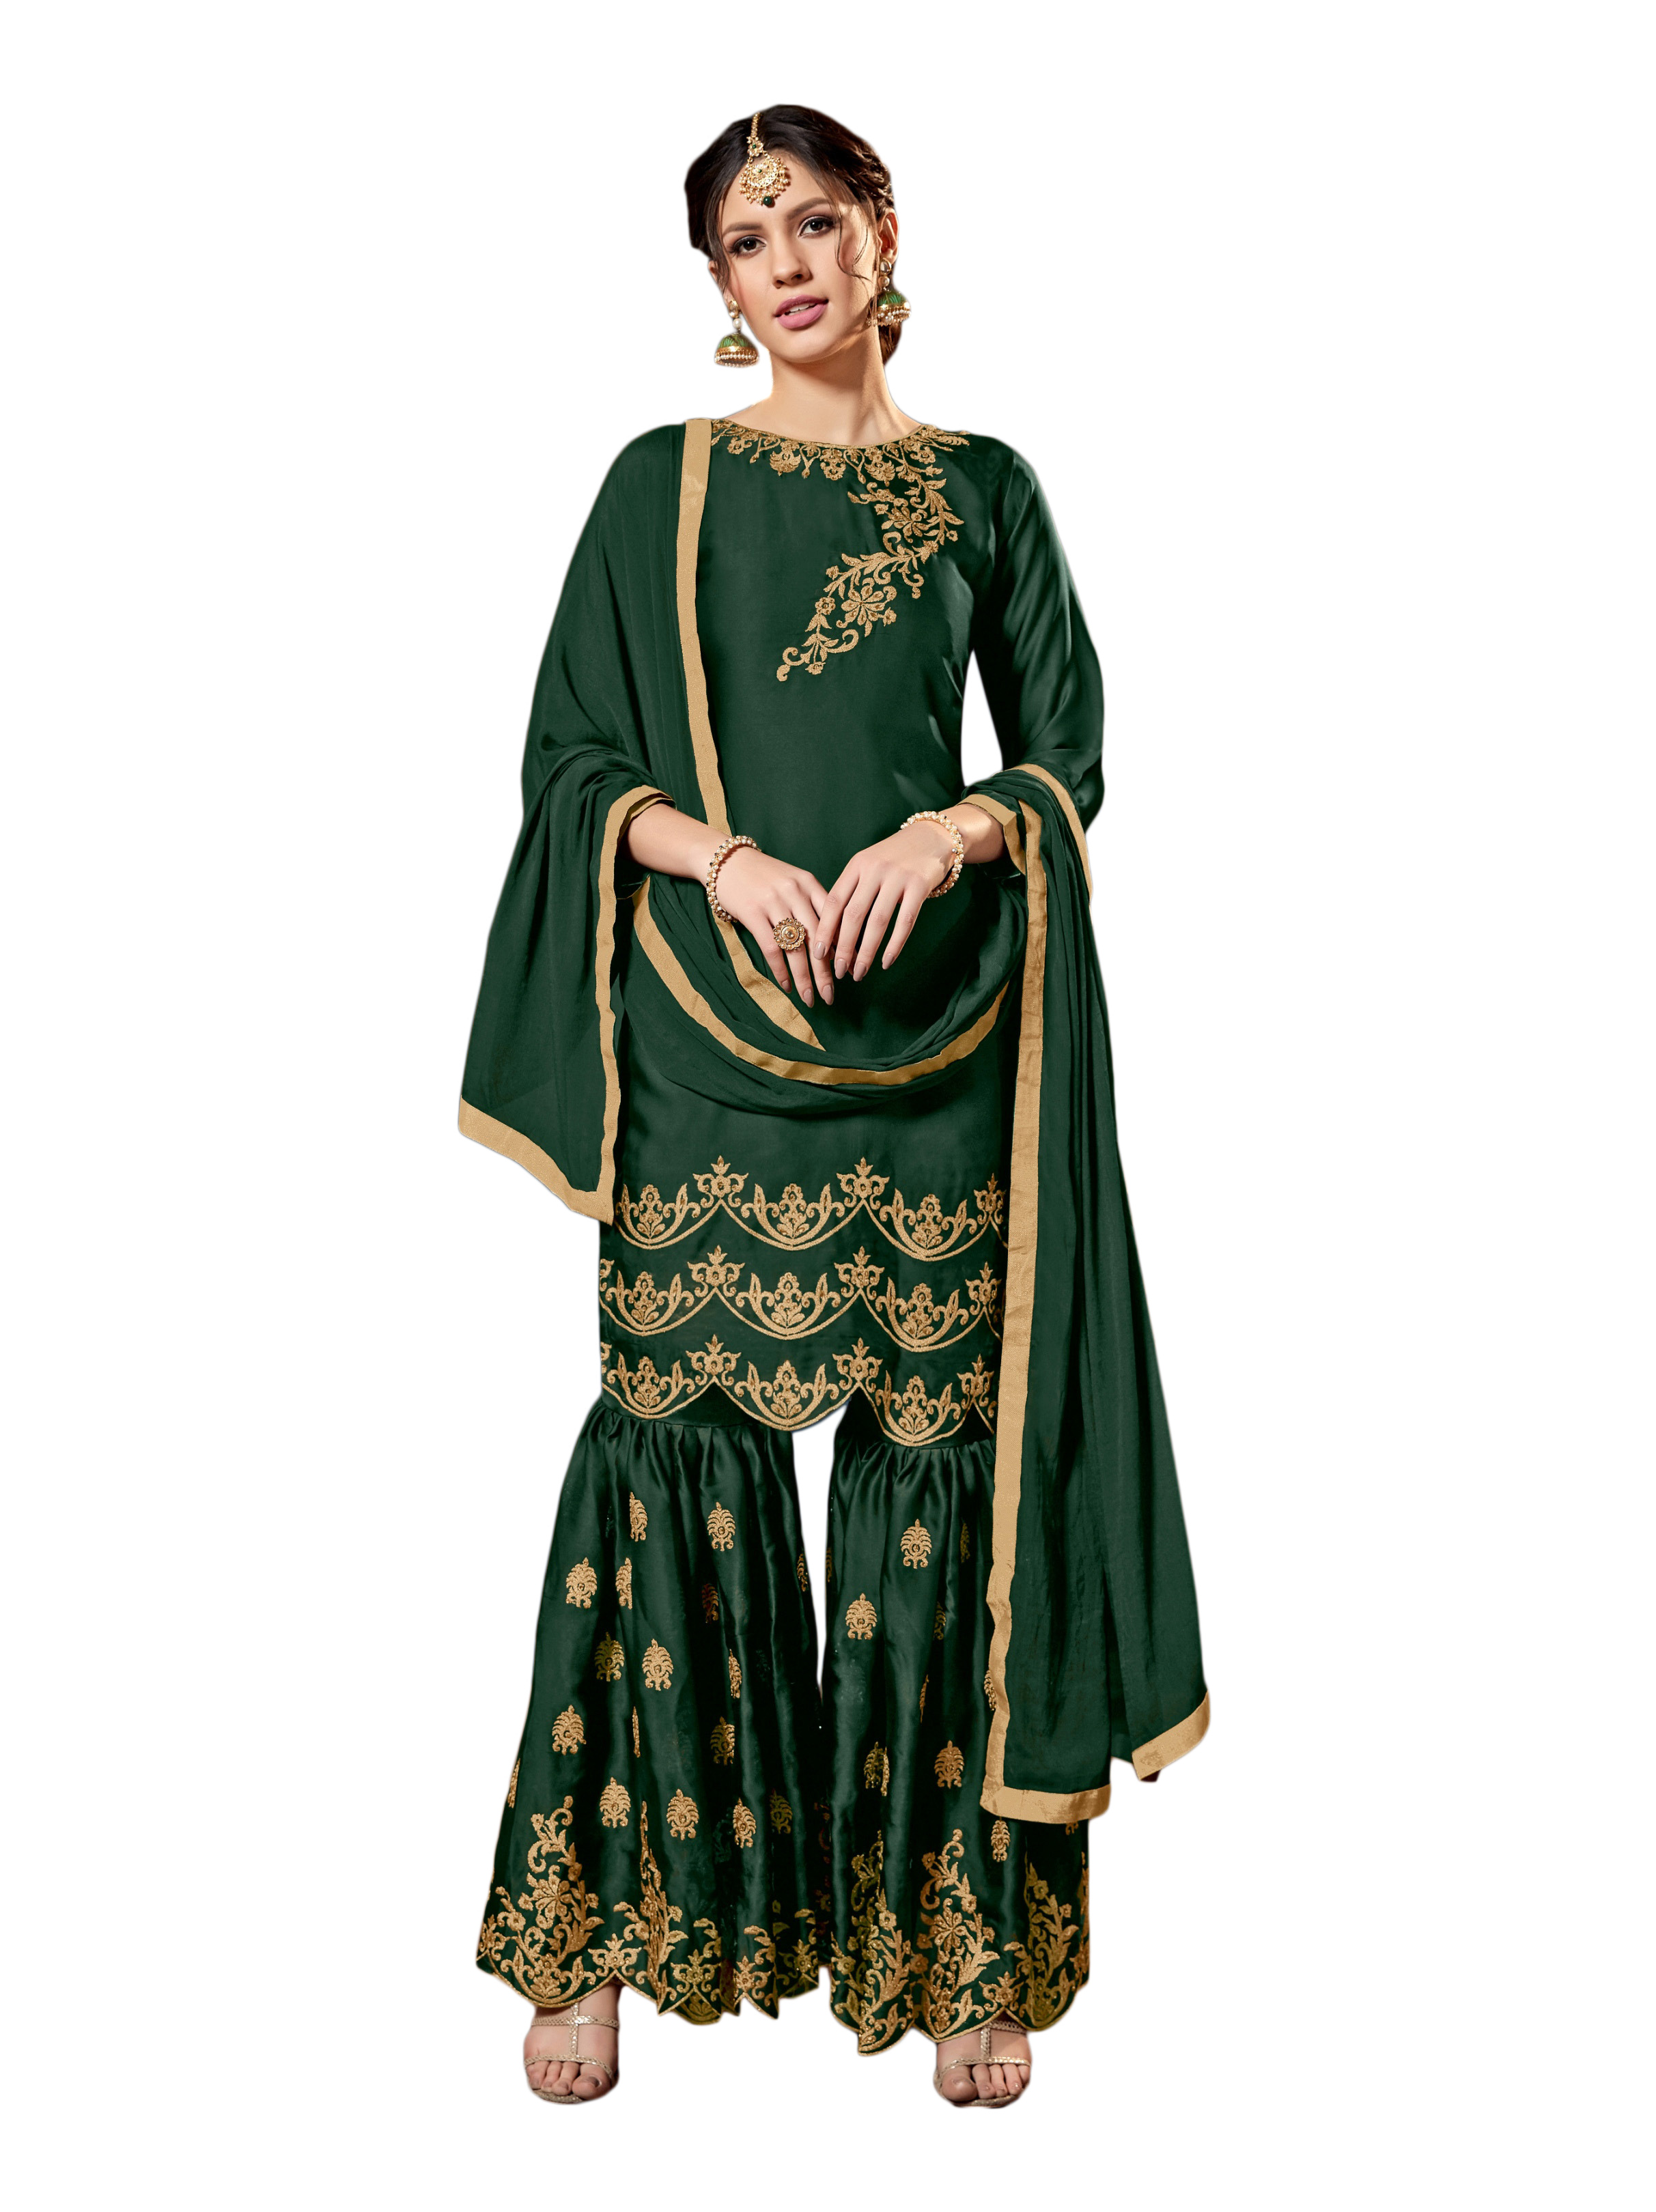 Upcoming Festive And Wedding Season With This Heavy Designer Sharara Suit